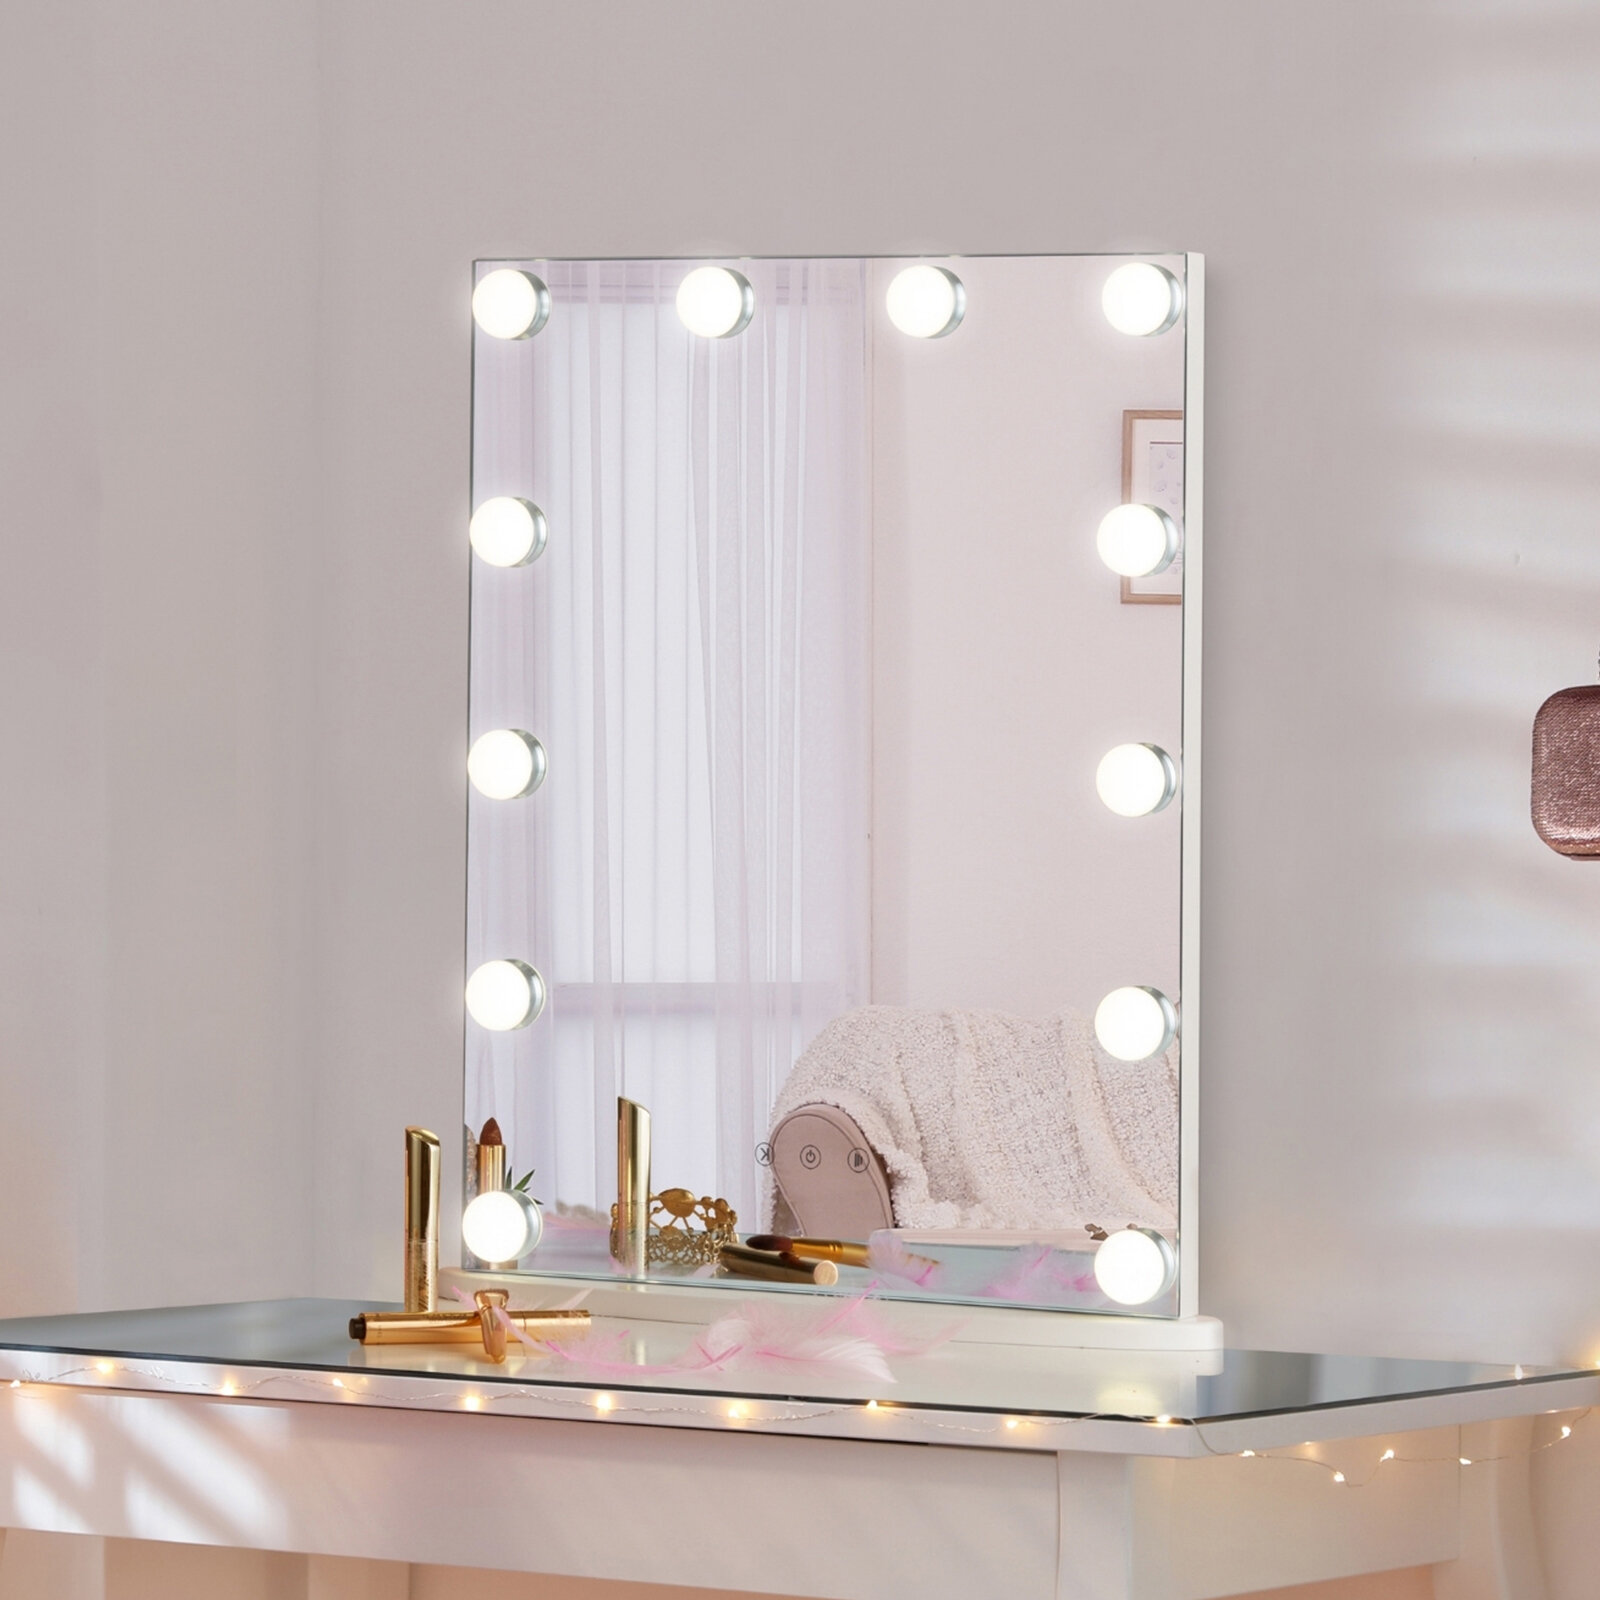 LUXFURNI Hollywood Lighted Vanity Makeup Mirror w/ 13 LED Lights Adjustable Angle for Dressing Table White Touch Control Dimmable Cold/Warm Light 